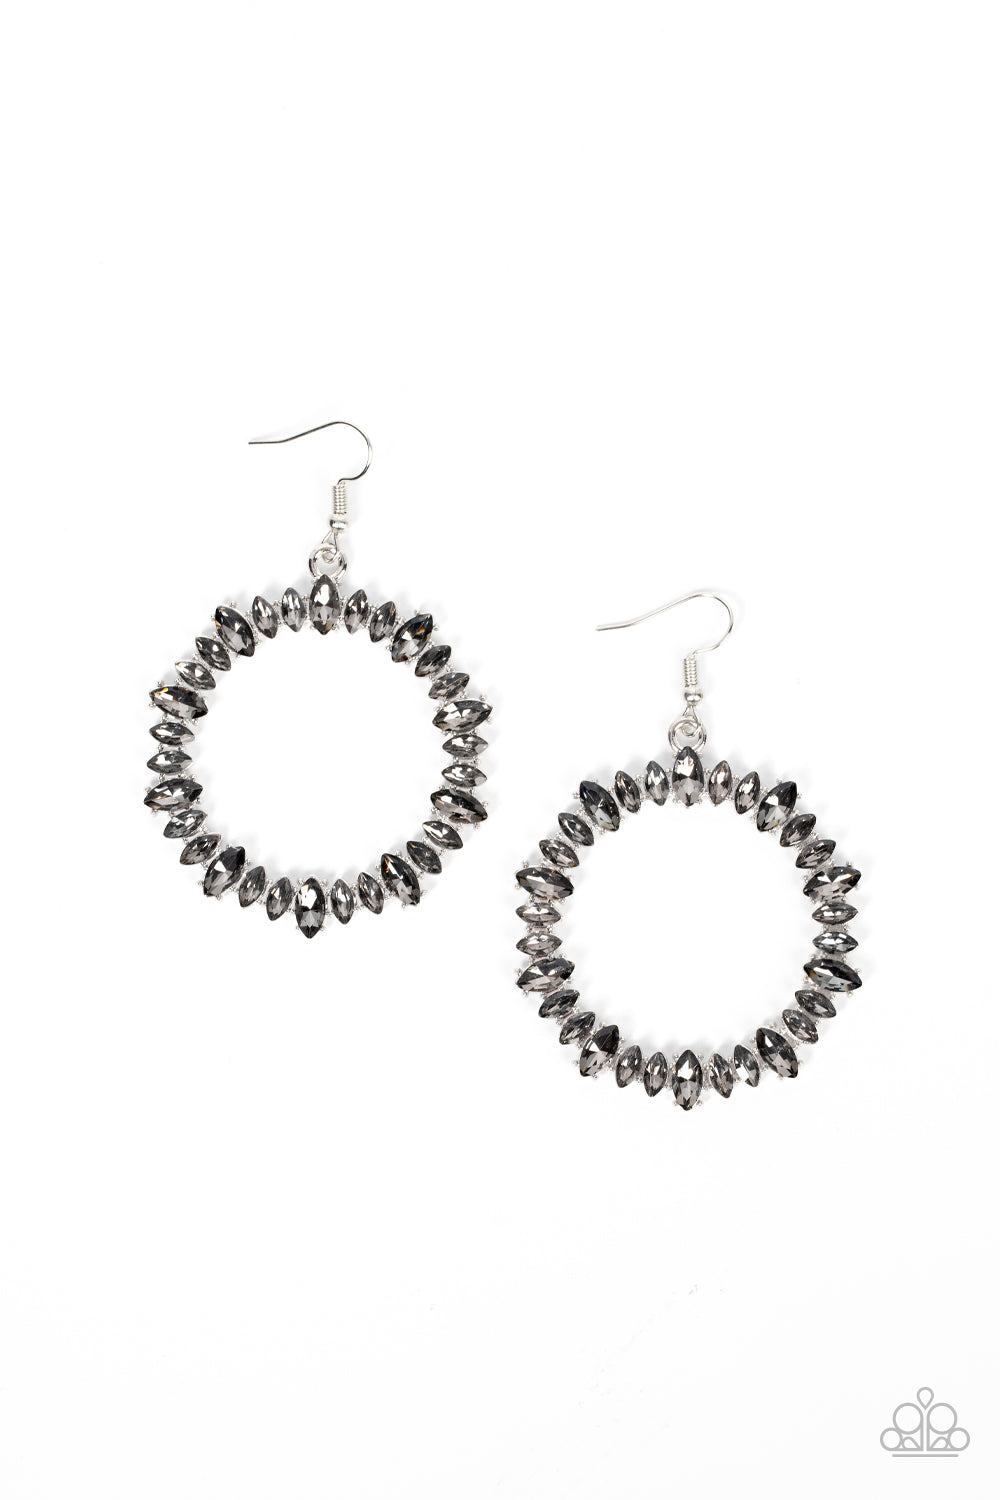 Glowing Reviews - Silver Pronged Fittings & Smoky Marquise-Cut Rhinestone Paparazzi Earrings